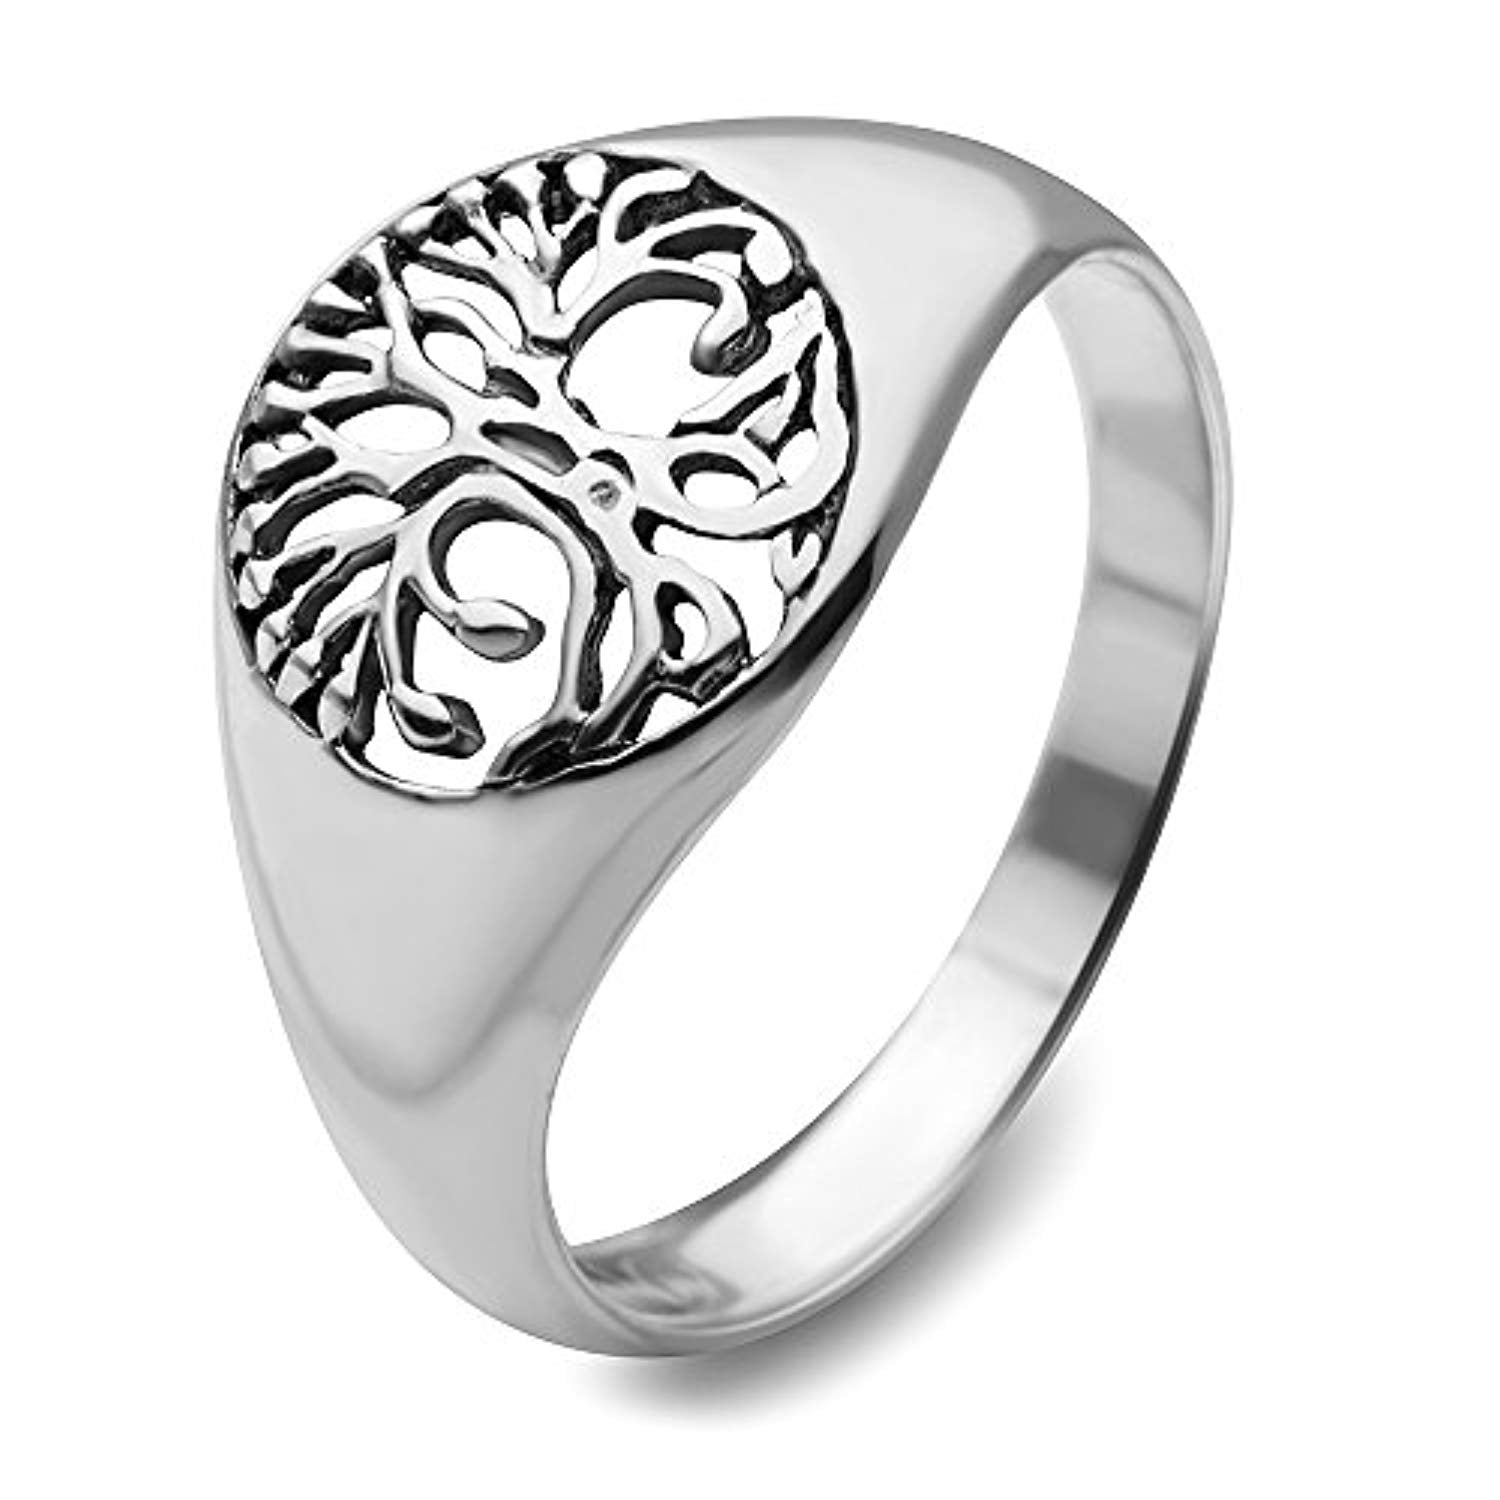 925 Sterling Silver Open Filigree Tree of Life Symbol Ring for Women - Nickel Free